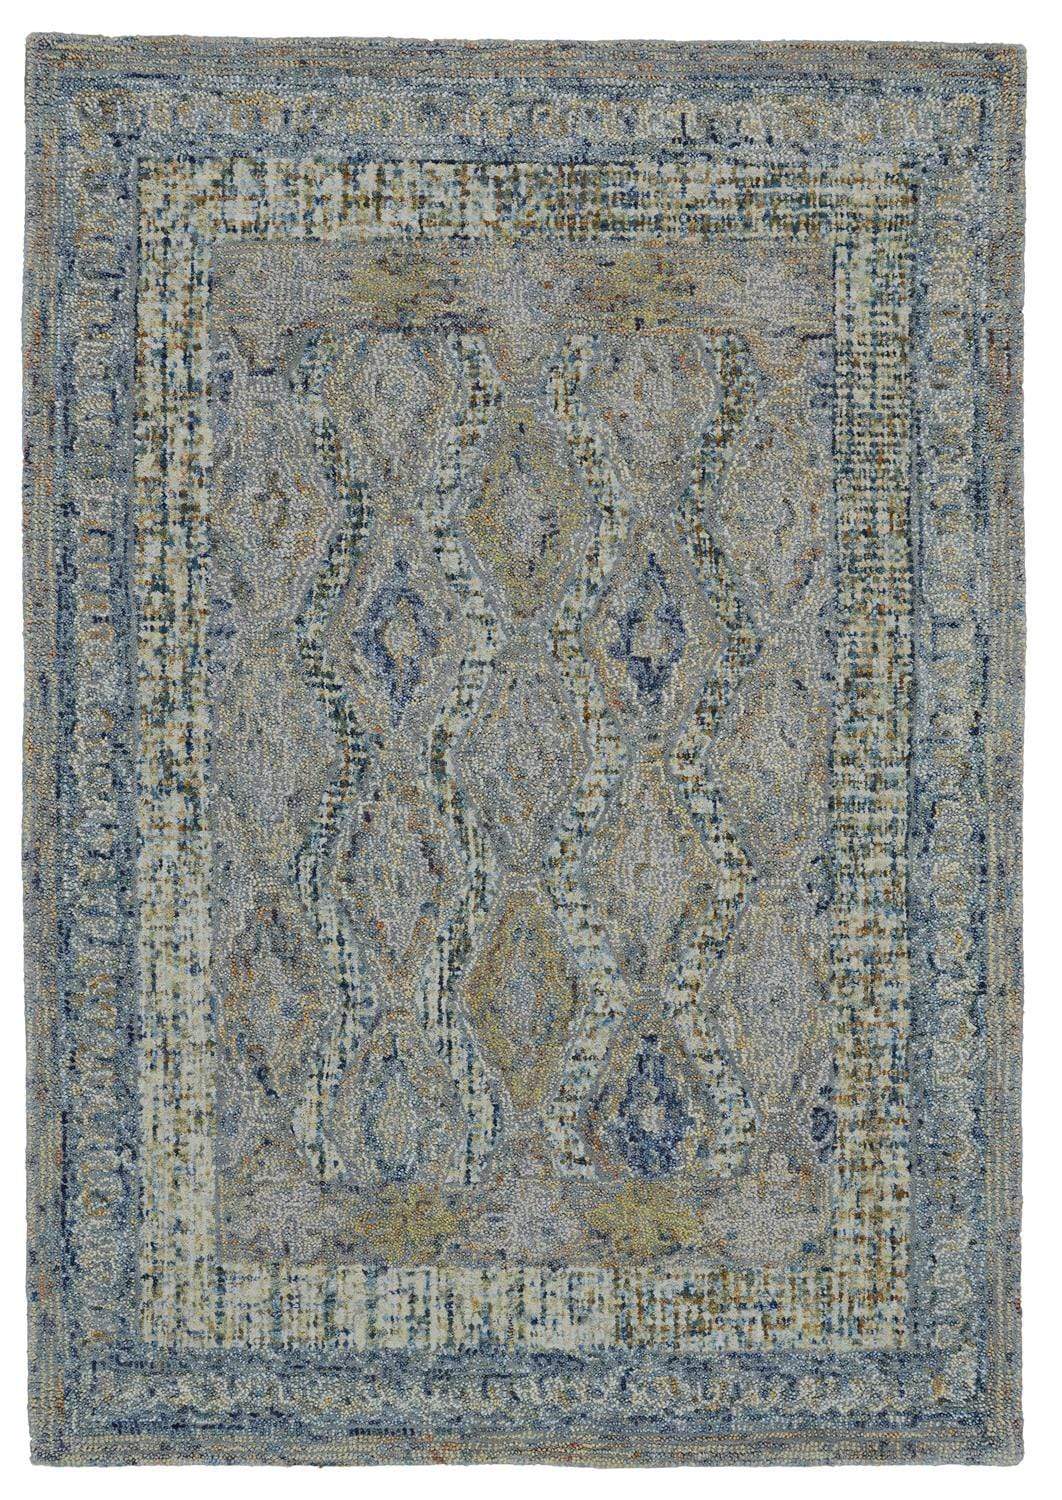 Feizy Feizy Isleta Ecclectic Vintage Tufted Rug - Available in 6 Sizes - Gray & Blue 3'-6" x 5'-6" 7138445FAUR000C50